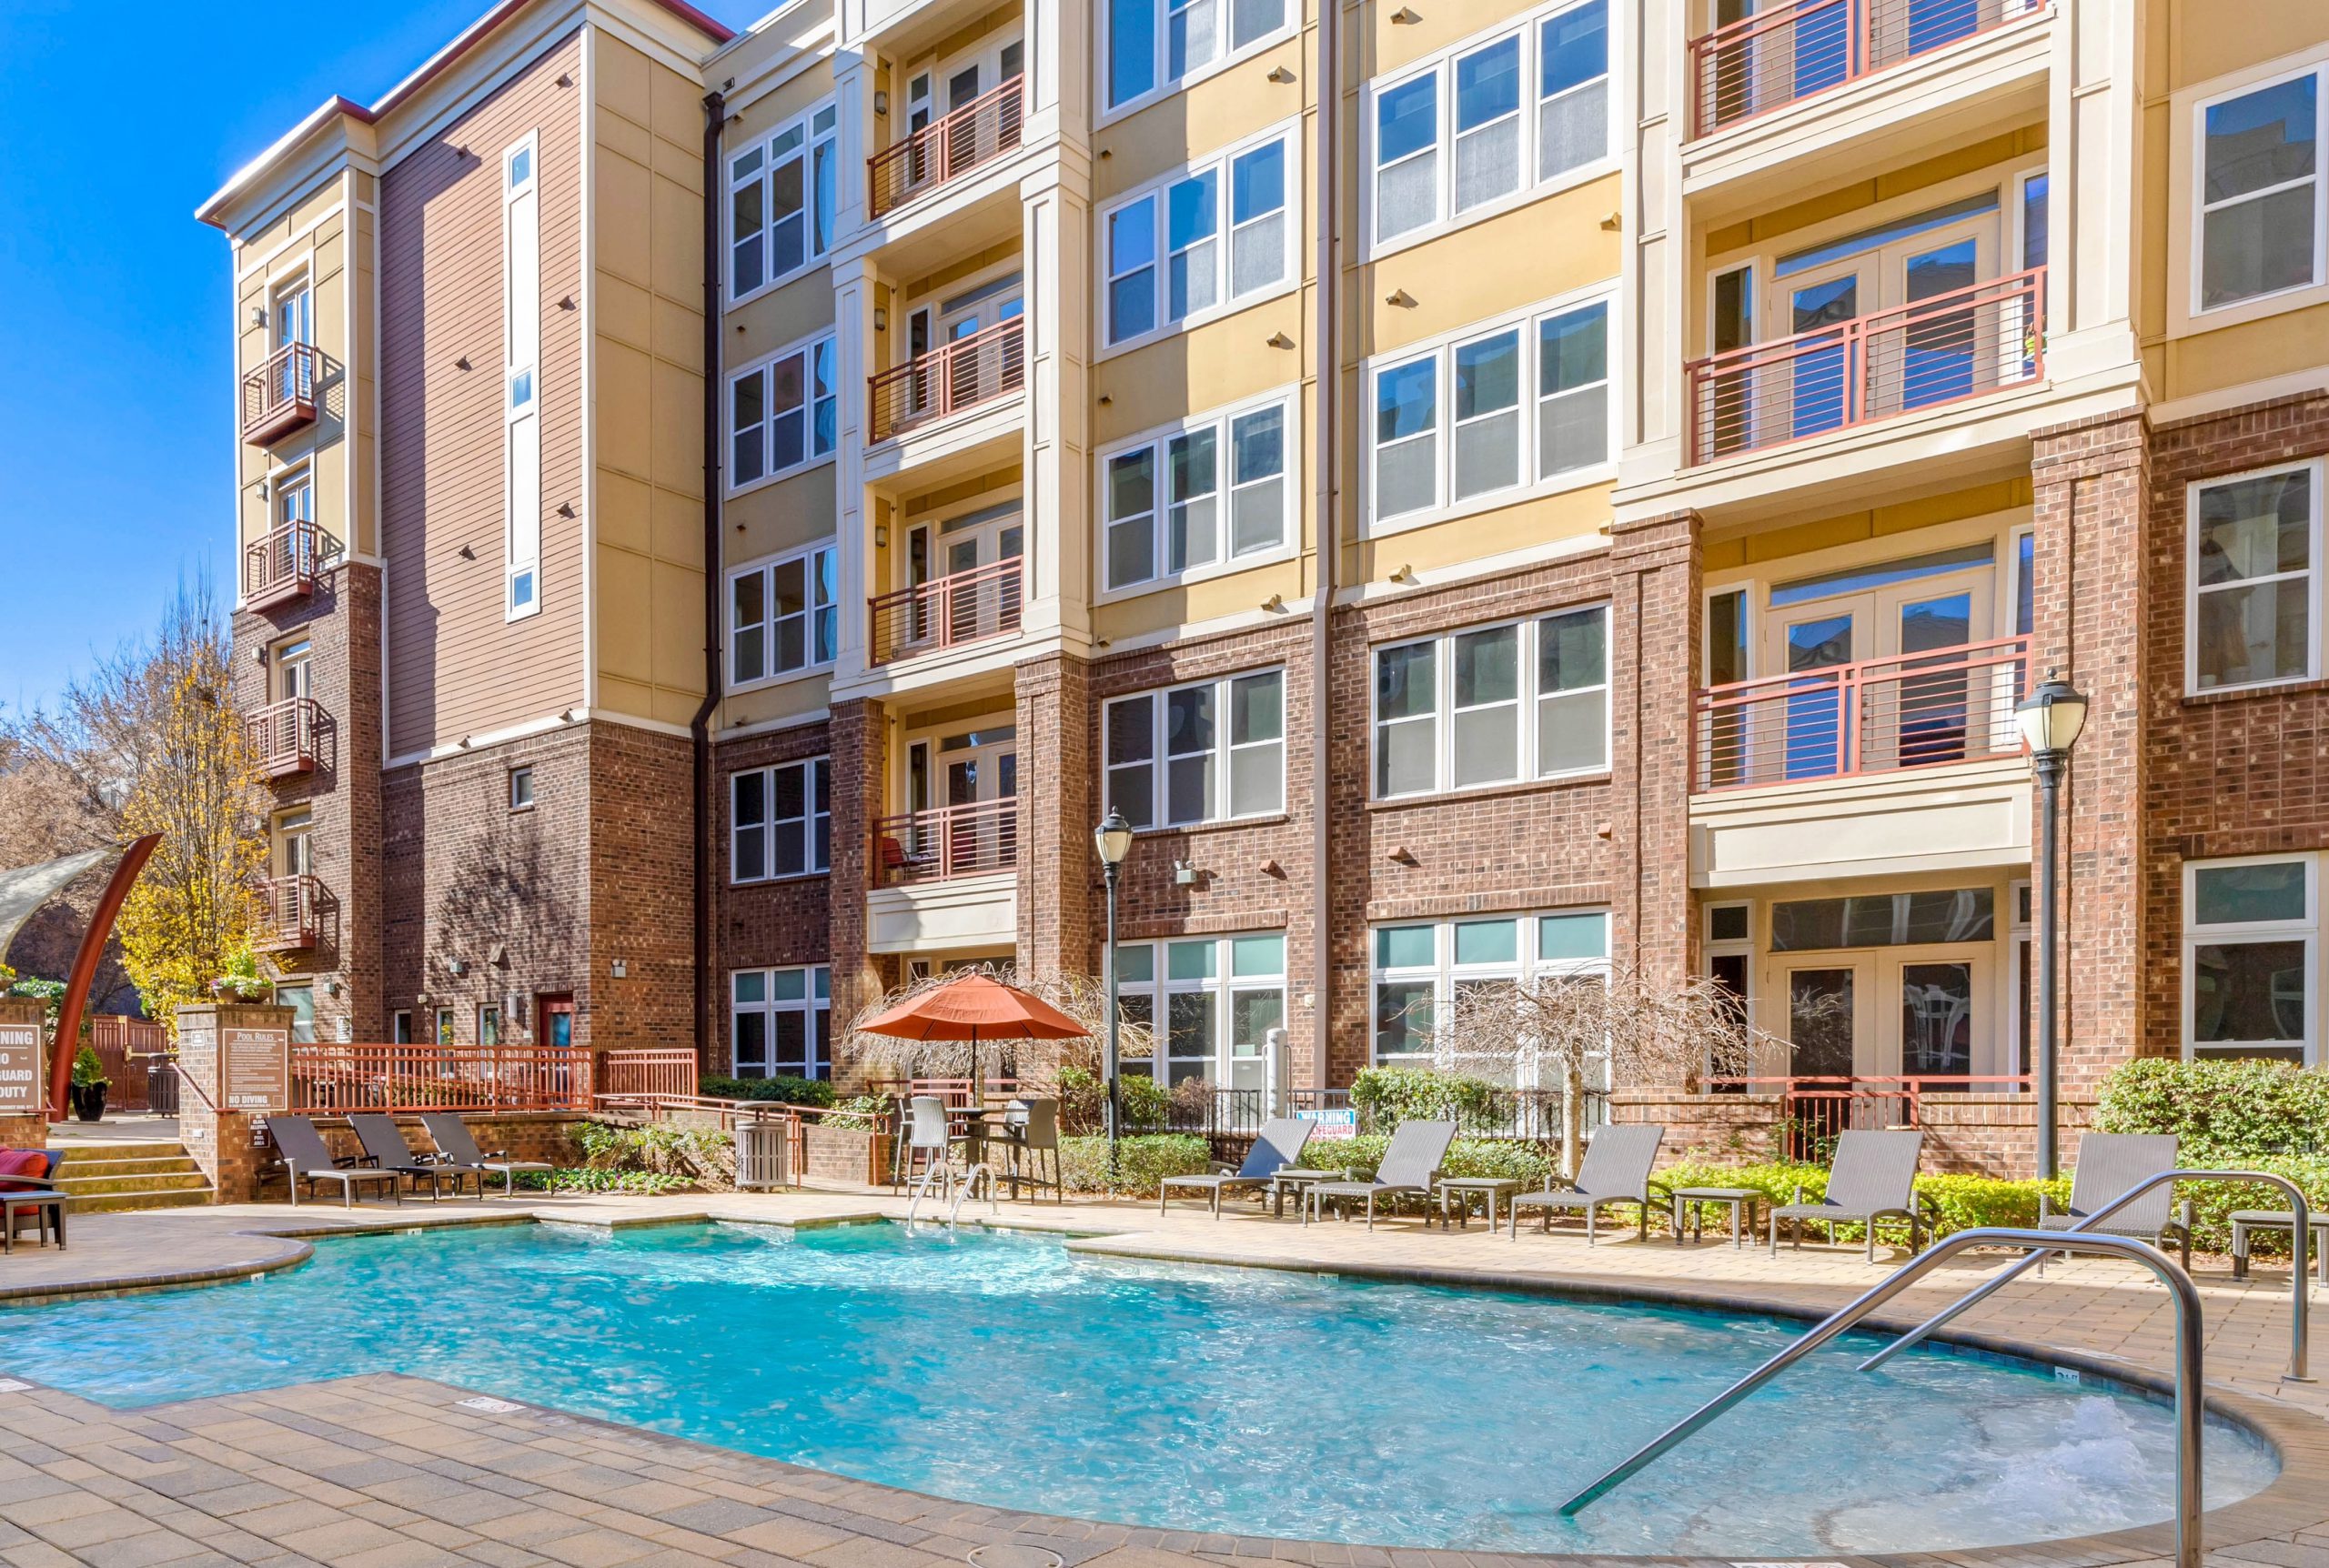 Hawthorne Residential Acquires Metro 808 Apartments in Charlotte, NC